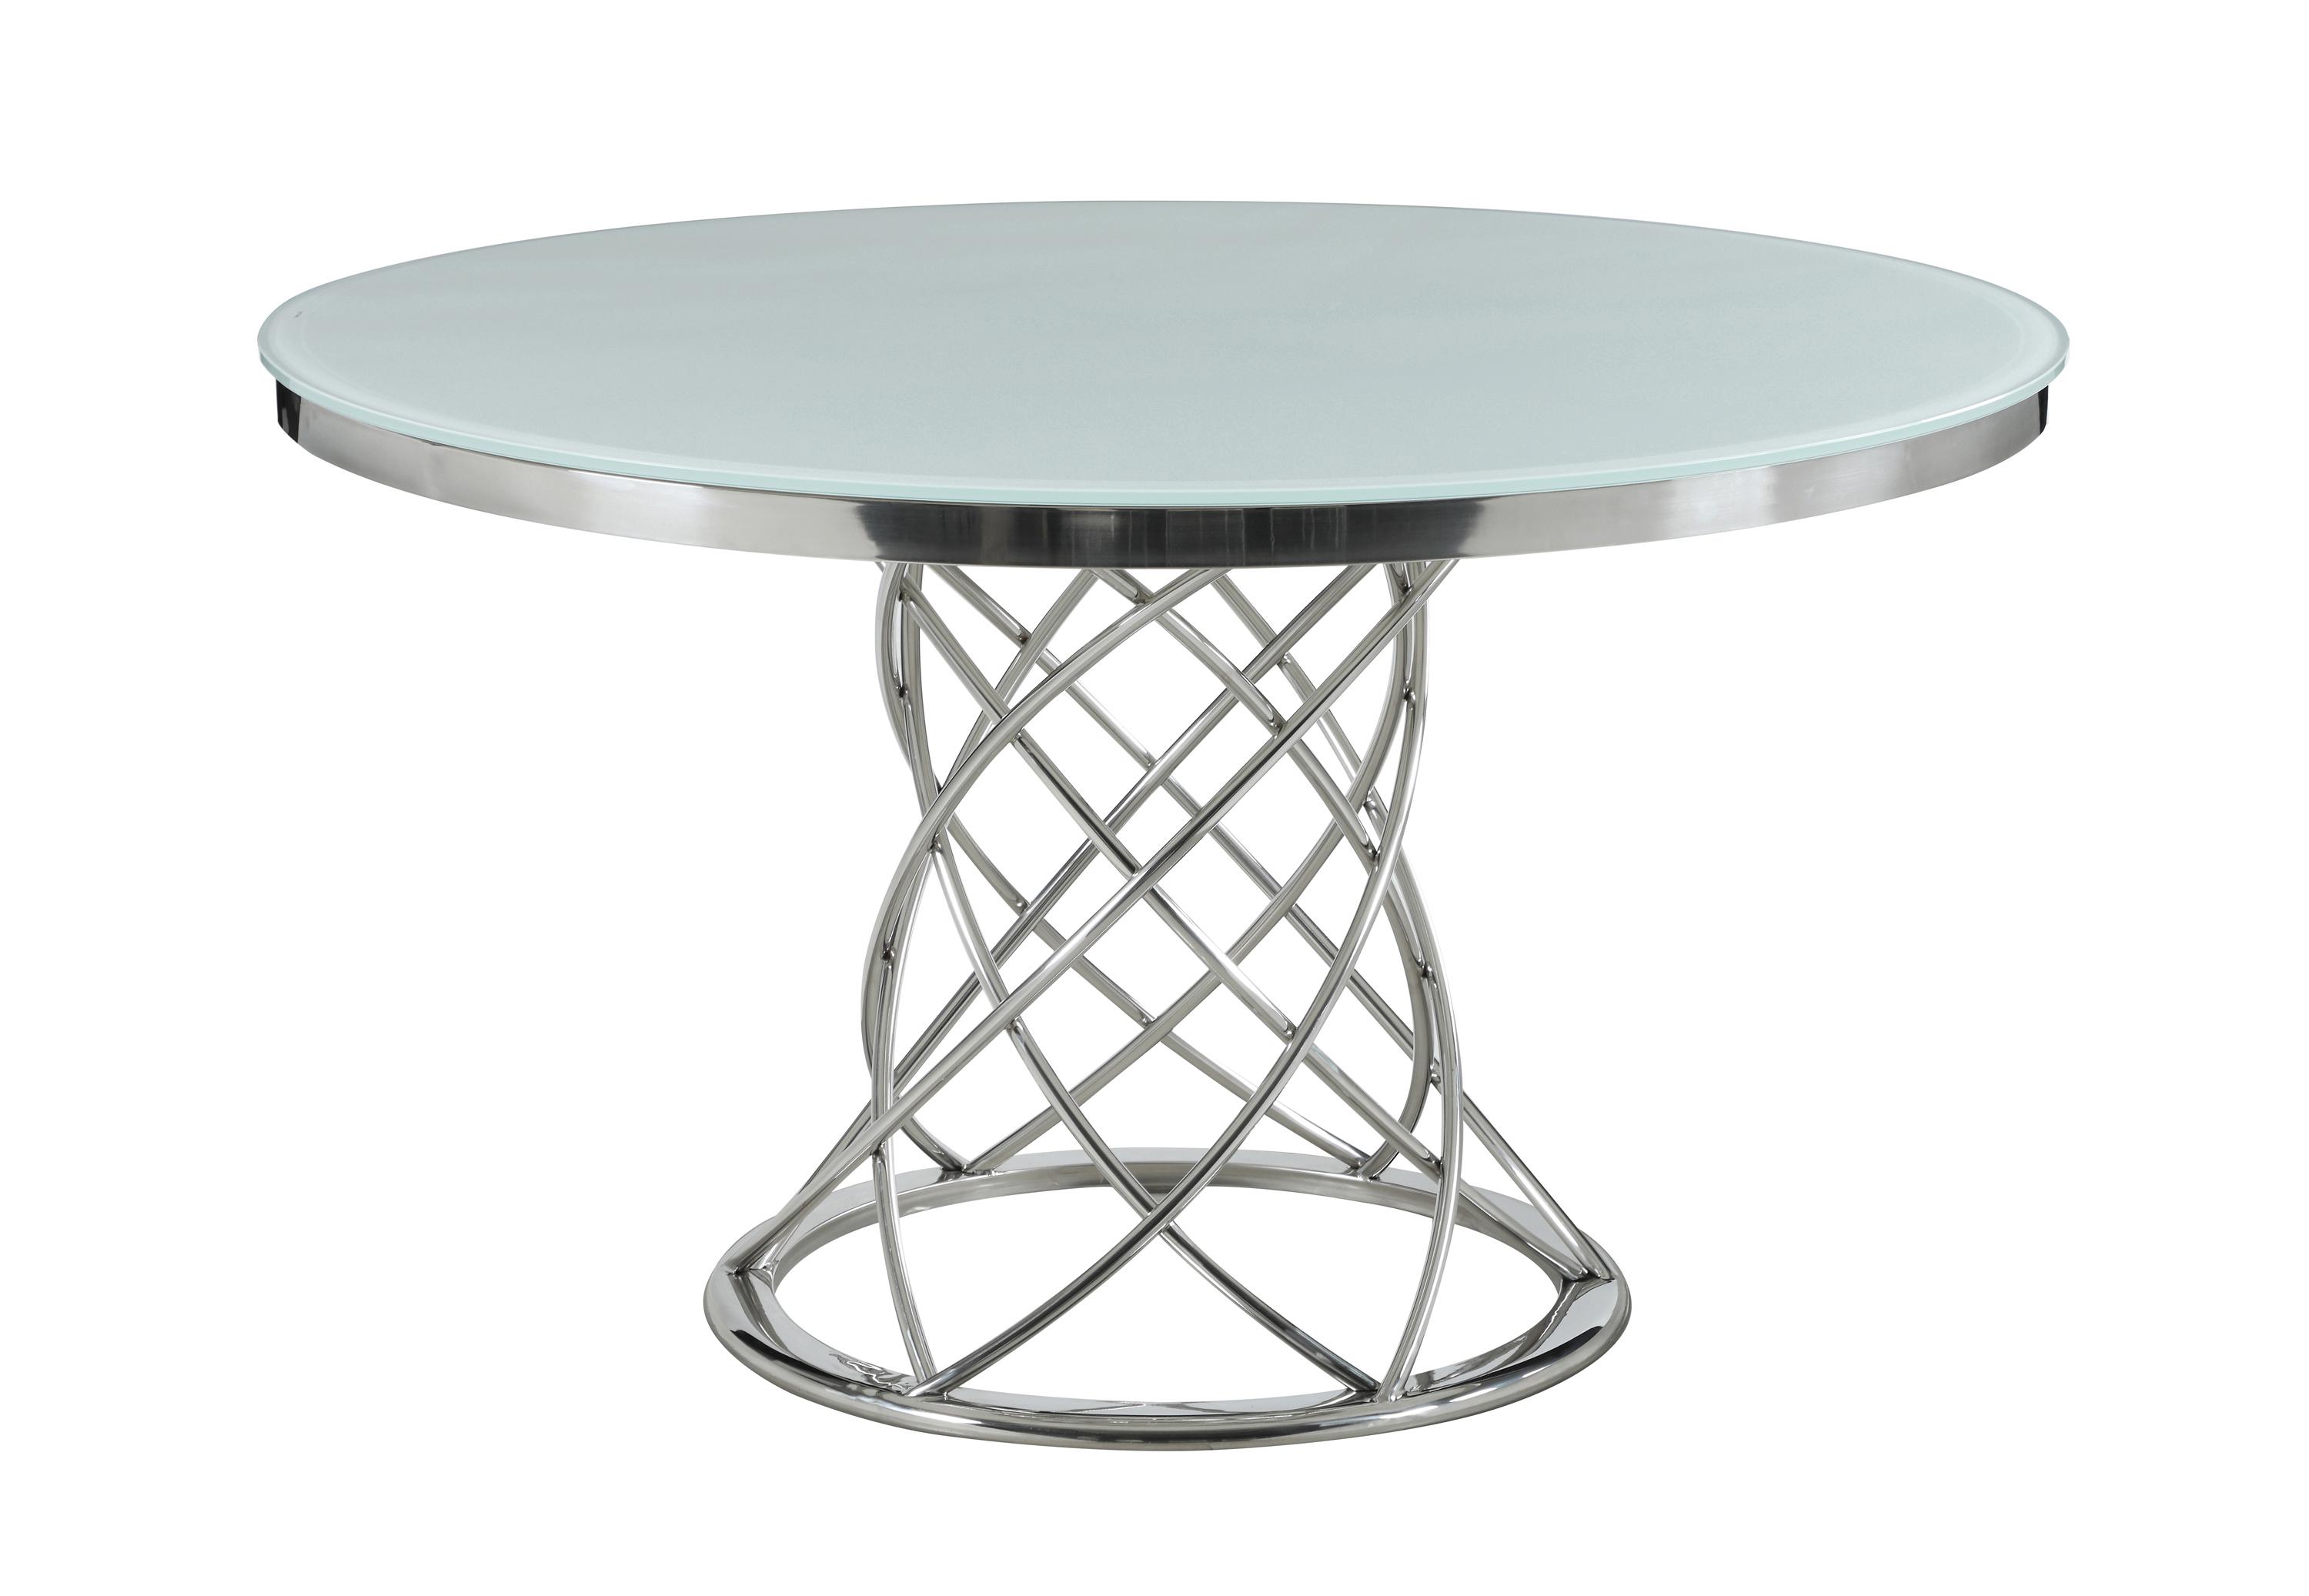 Contemporary Dining Table 110401 Irene 110401 in Chrome 